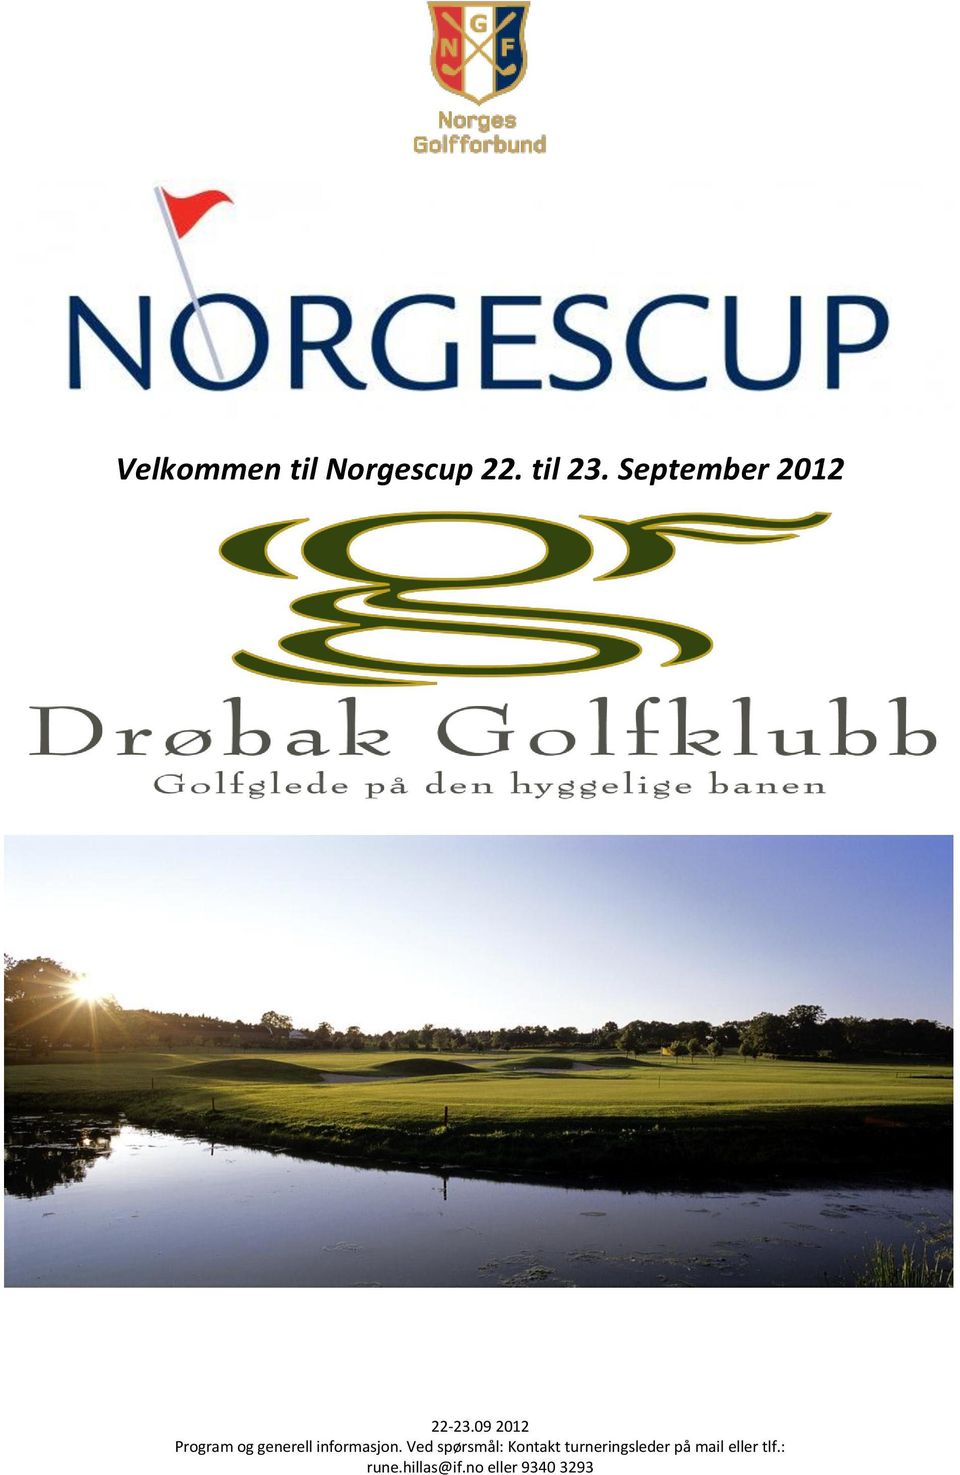 Norgescup 22.